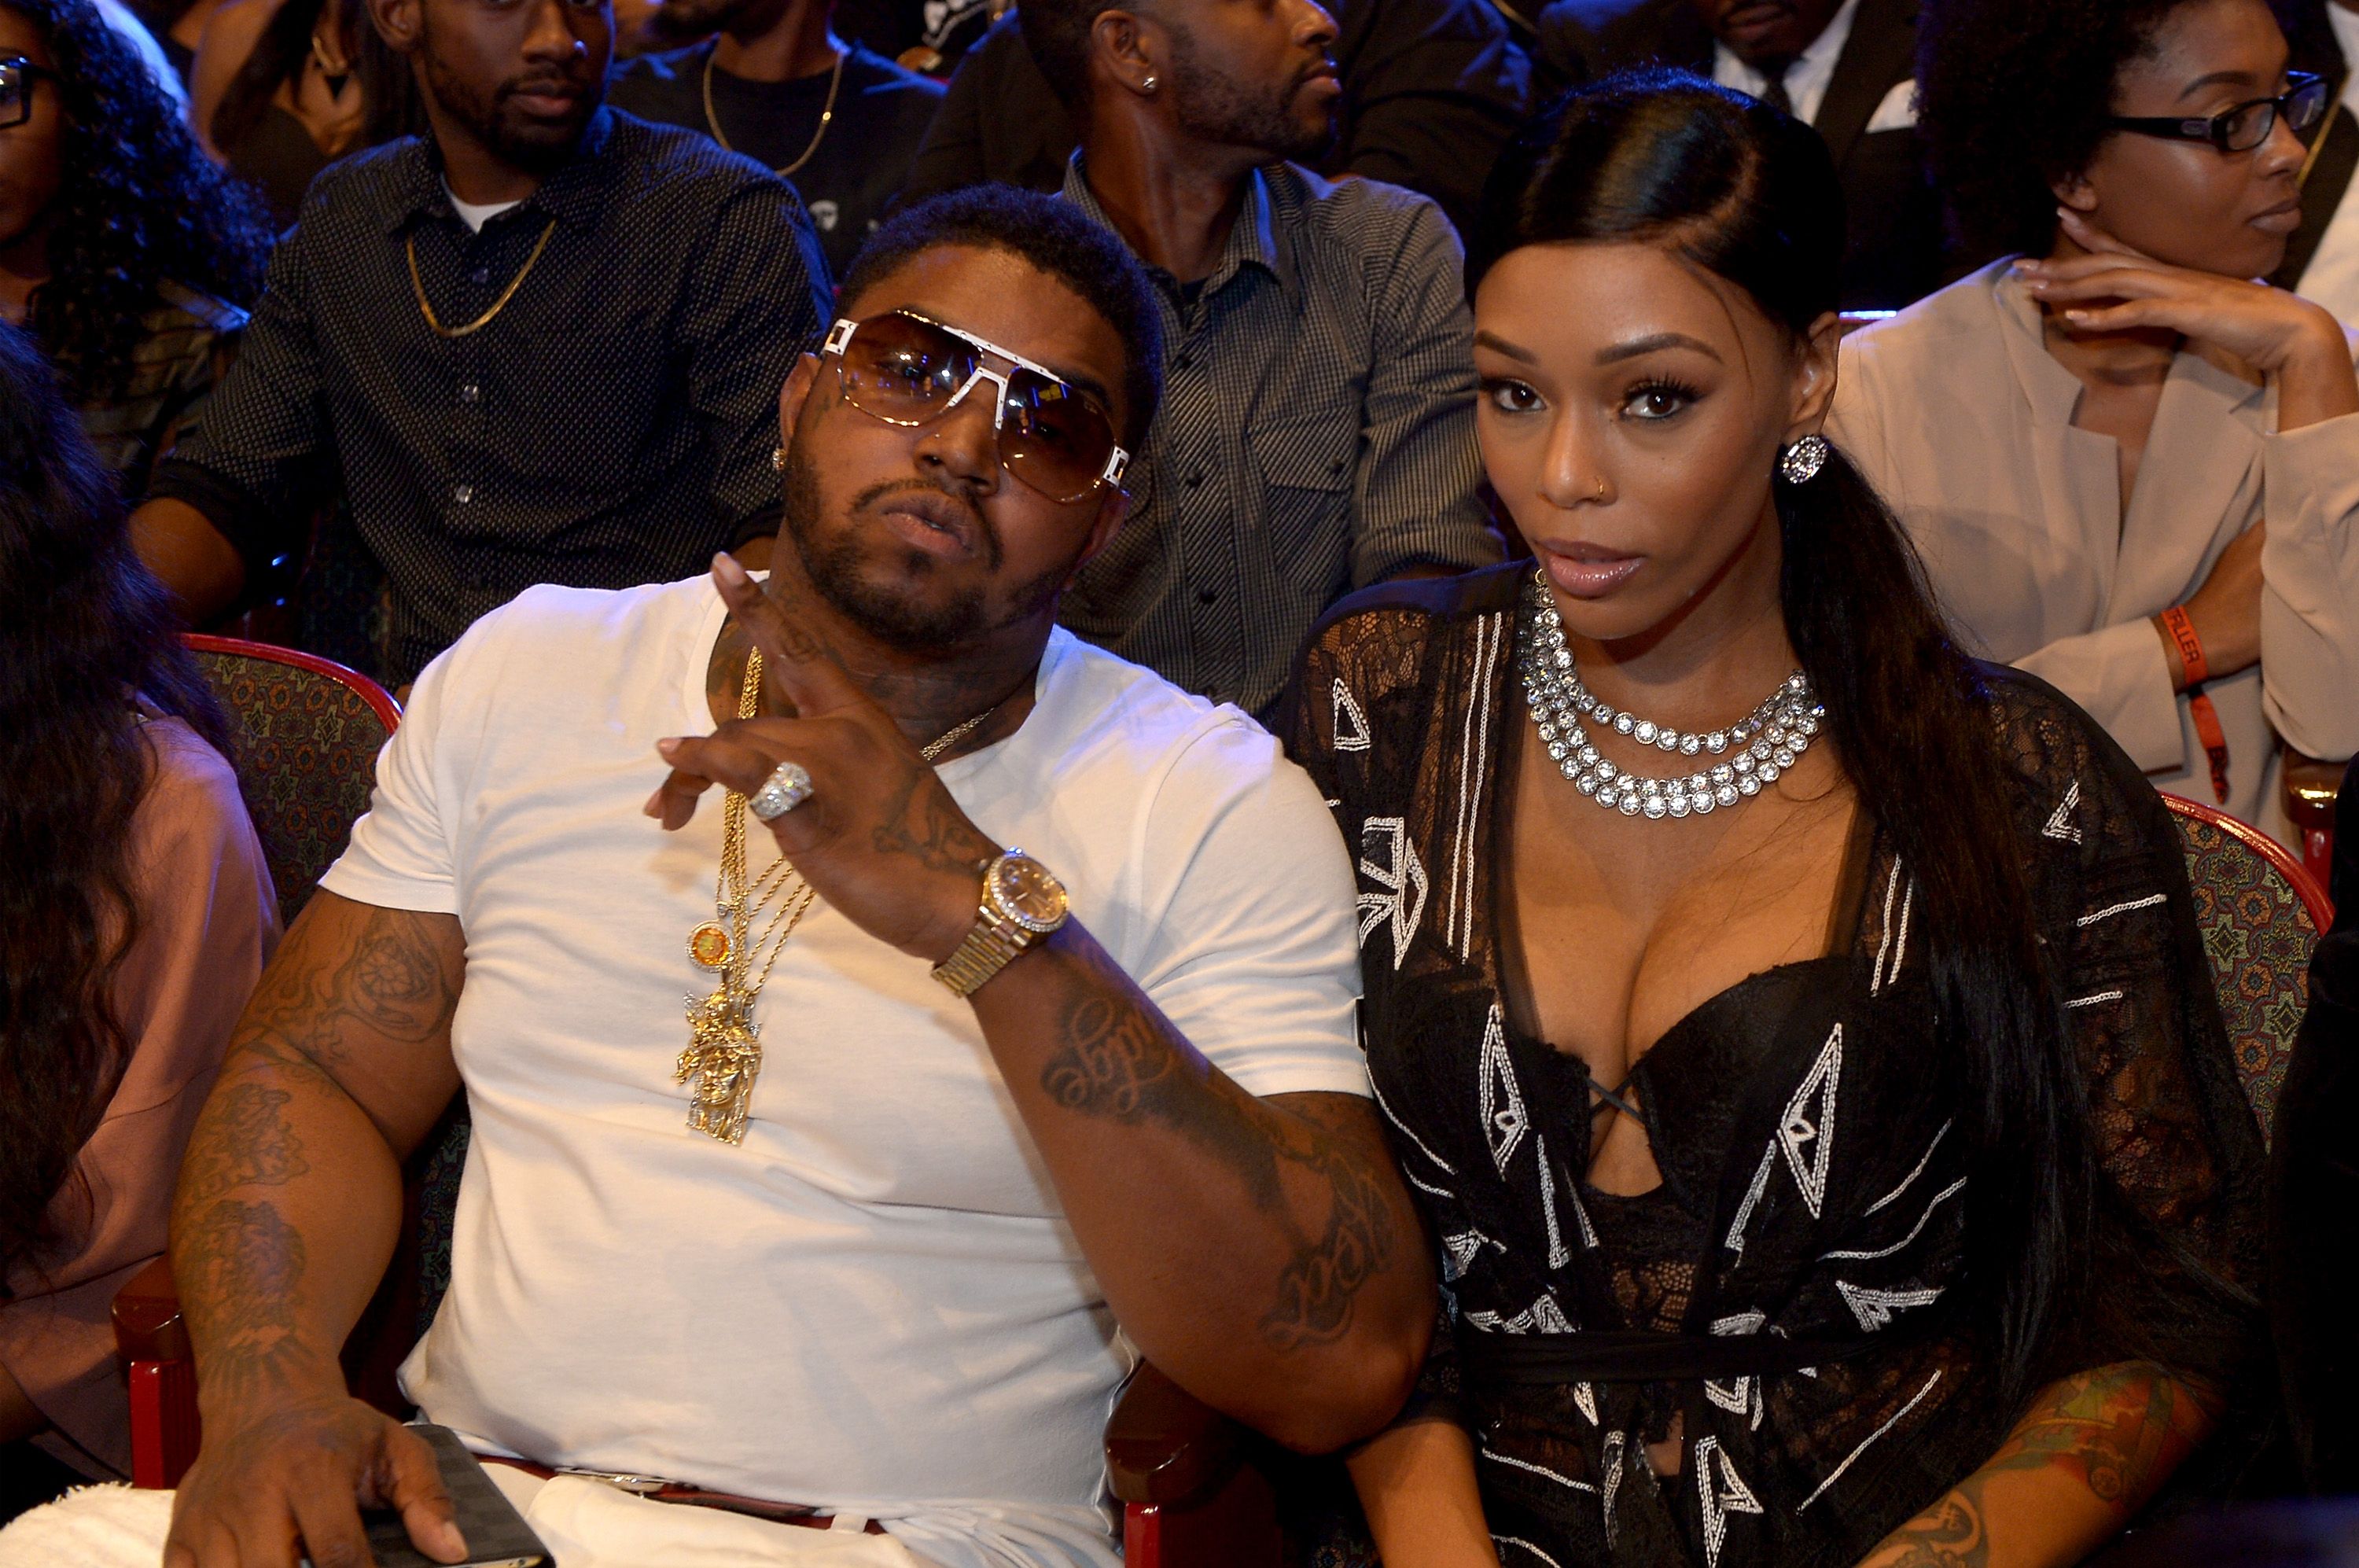 Lil Scrappy and Bambi Benson at the BET Hip Hop Awards at the Atlanta Civic Center on October 9, 2015 in Atlanta, Georgia | Photo: Getty Images  